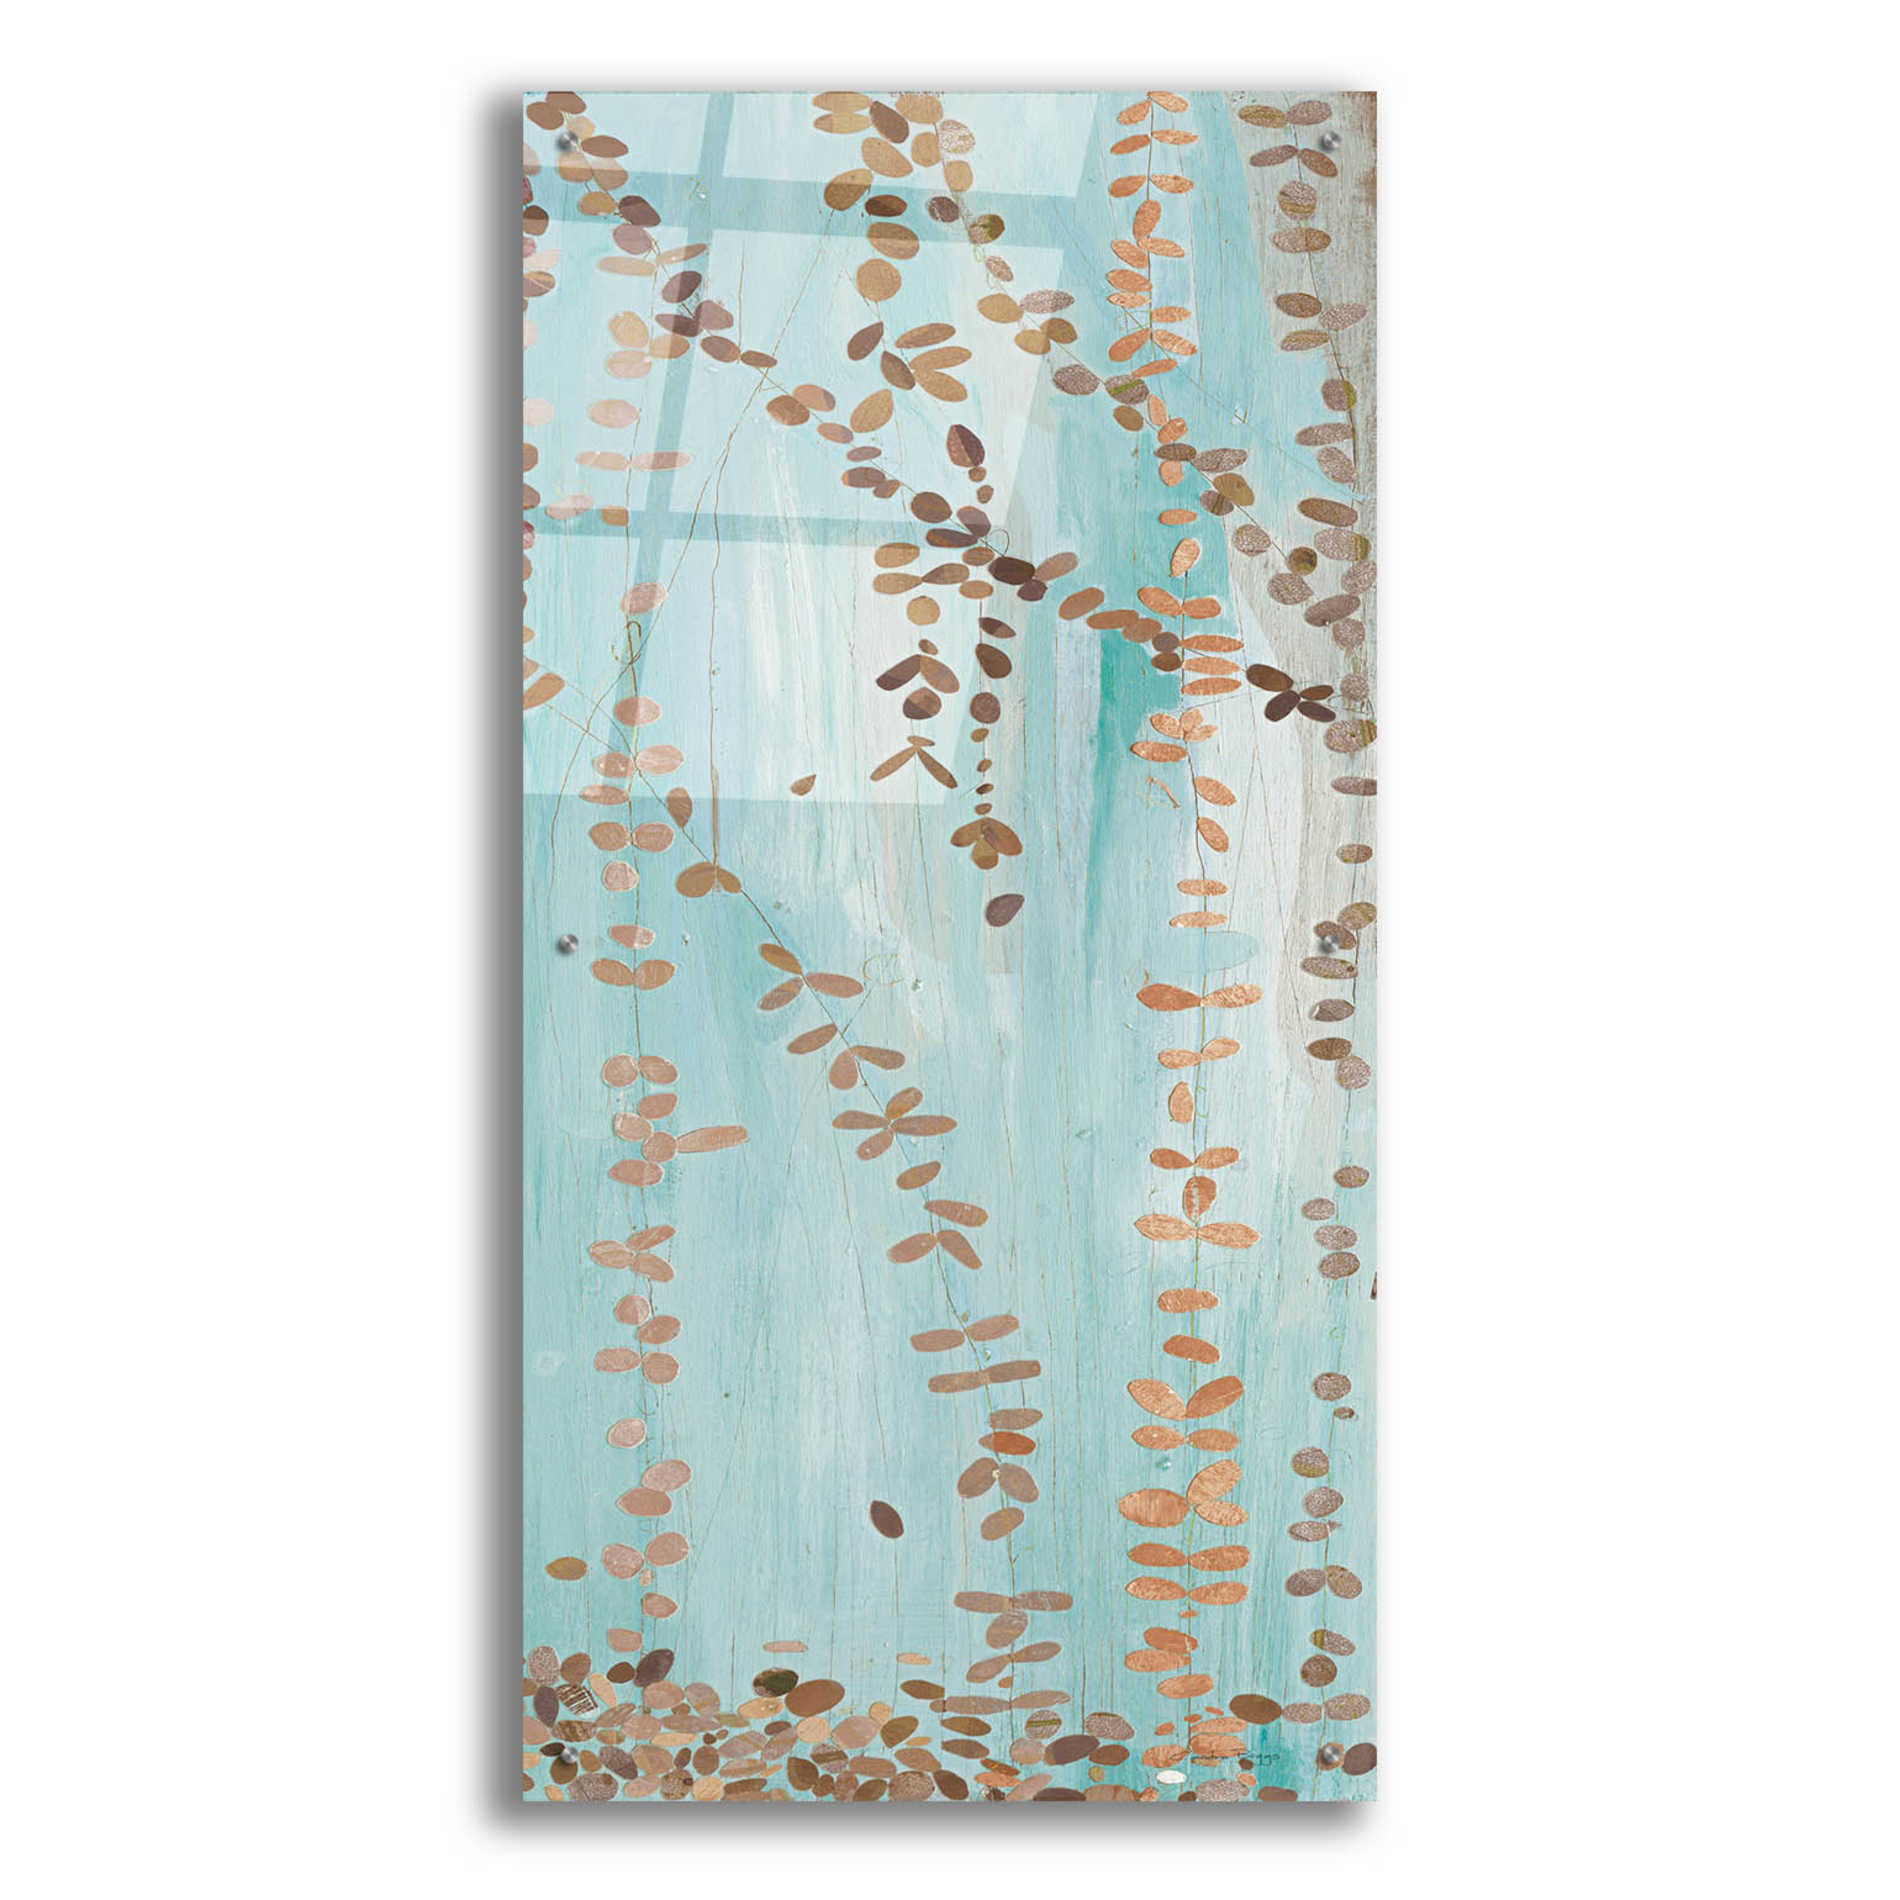 Epic Art 'Trailing Vines III Blue' by Candra Boggs,  Acrylic Glass Wall Art,24x48